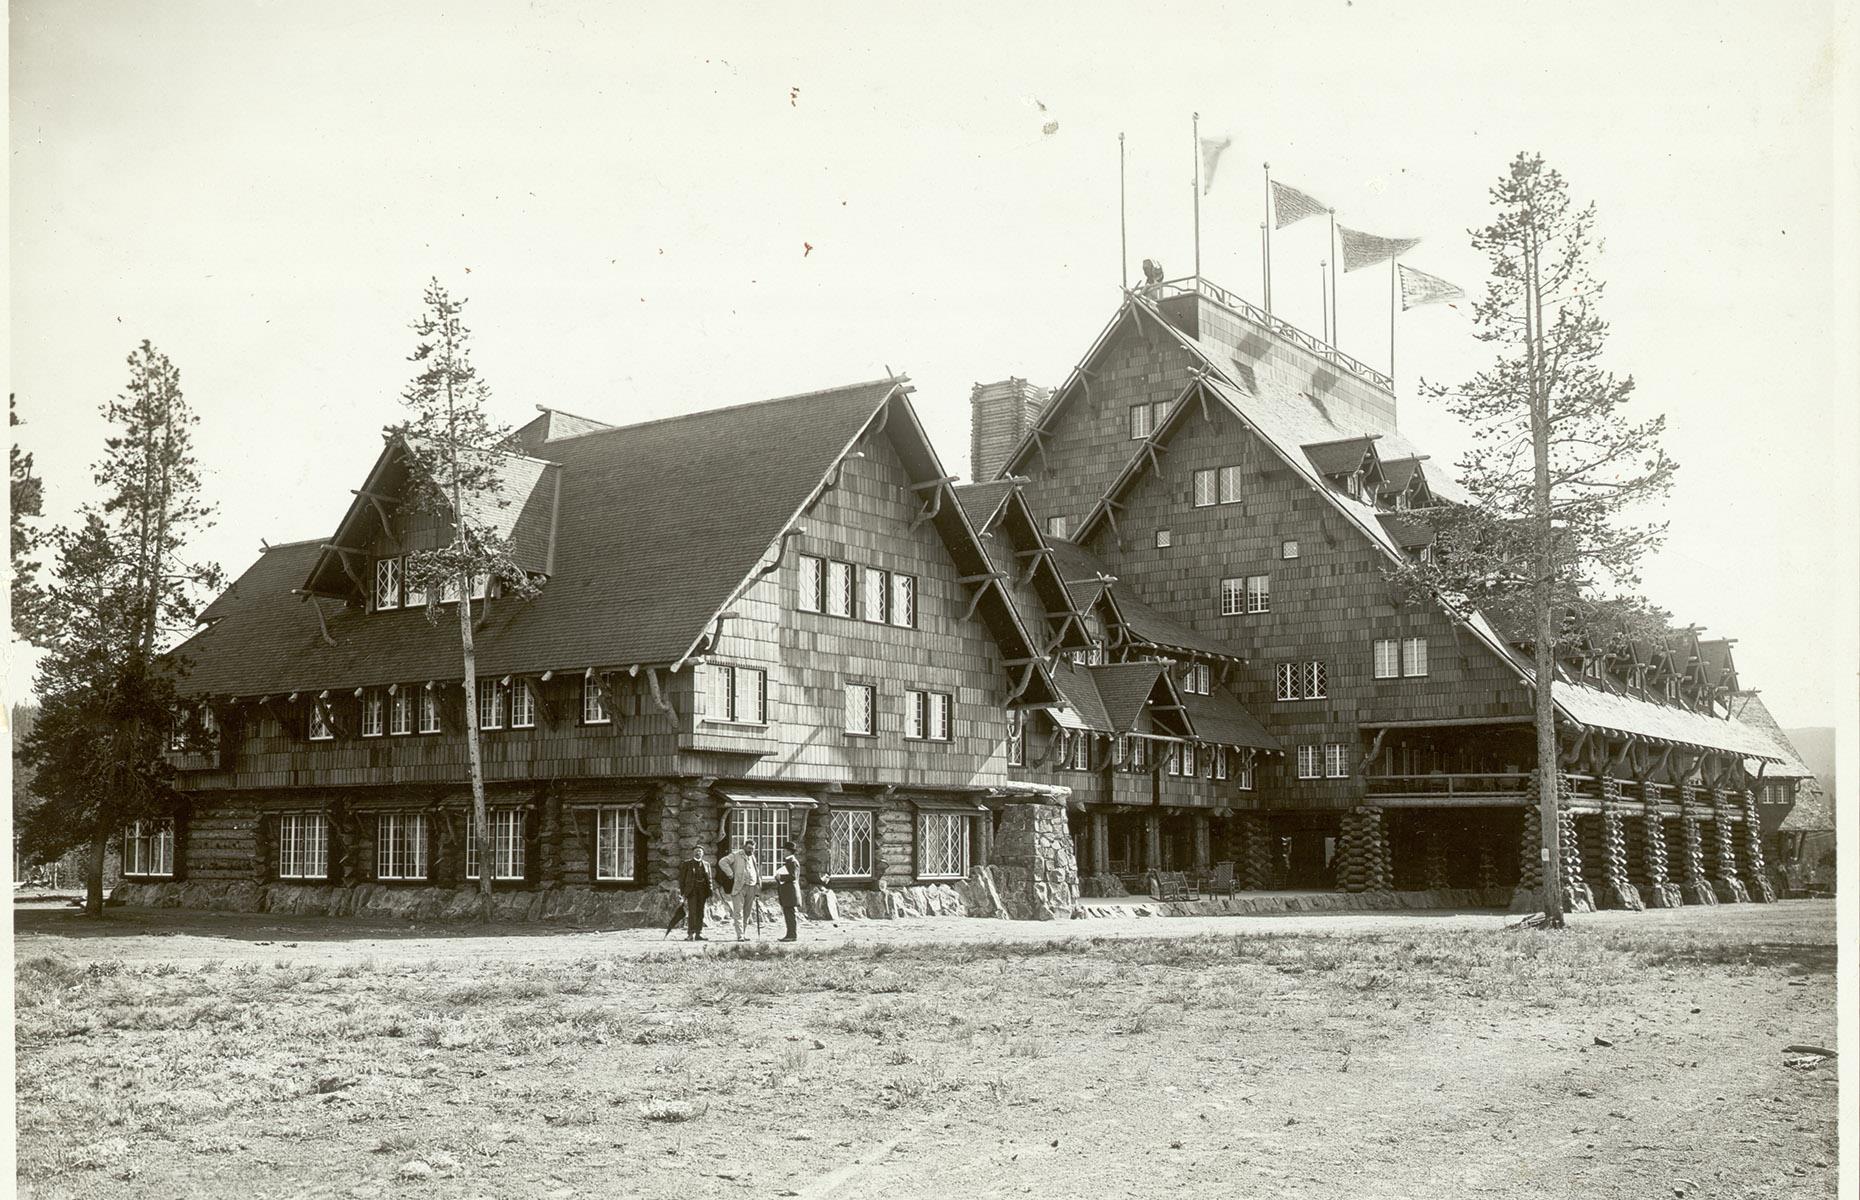 <p>Though visitor numbers were fairly low in the park's early days, those adventurous travelers needed somewhere to stay. Old Faithful Inn was designed by architect Robert C. Reamer and built between 1903 and 1904. Snapped here circa 1904, it's still renowned for its inviting lobby with a mammoth stone fireplace. </p>  <p><a href="http://bit.ly/3roL4wv"><strong>Love this? Follow our Facebook page for more travel inspiration</strong></a></p>